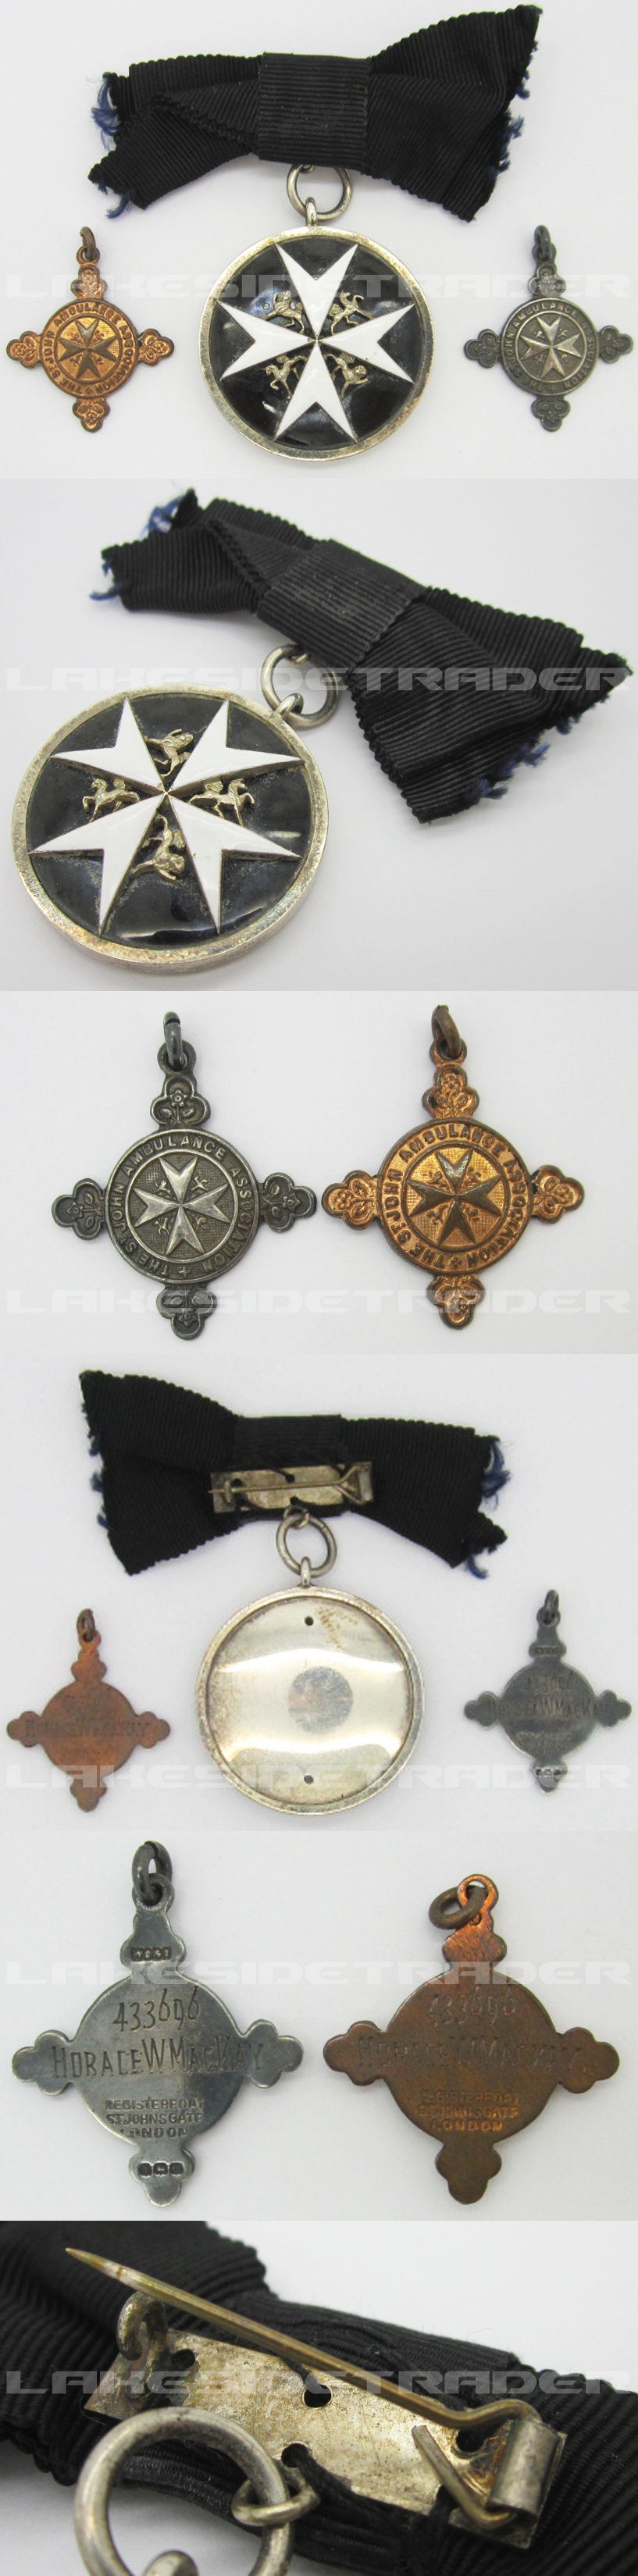 The Order of St. John Serving Sister Breast Badge with Miniatures